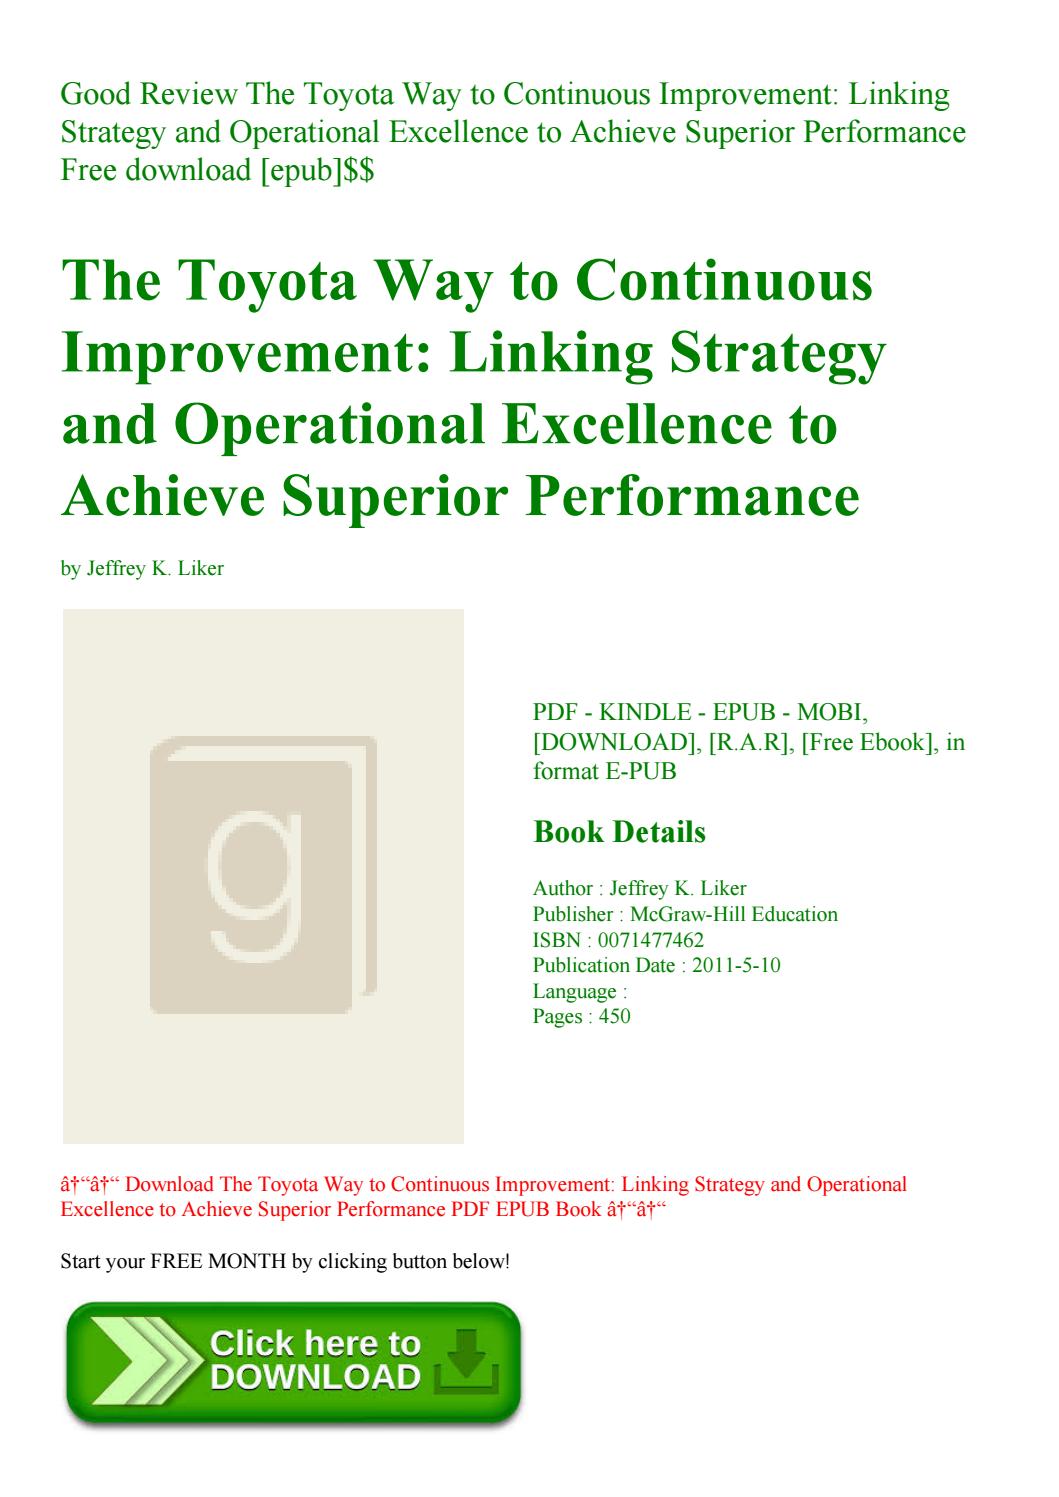 The toyota way free download